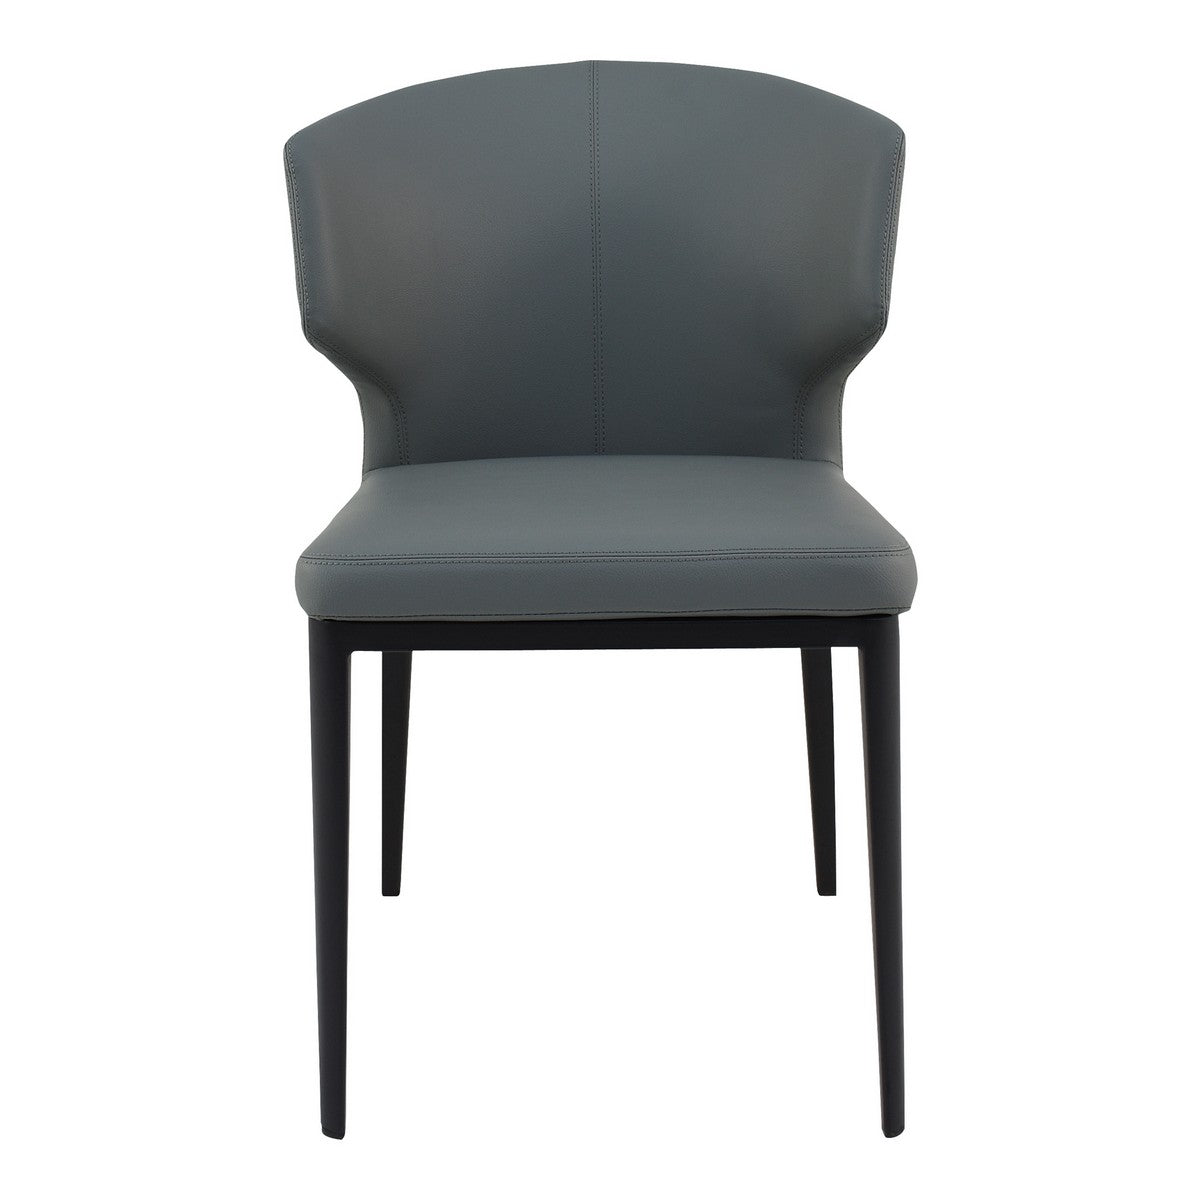 Moe's Home Collection Delaney Side Chair Grey-Set of Two - EJ-1018-15 - Moe's Home Collection - Dining Chairs - Minimal And Modern - 1